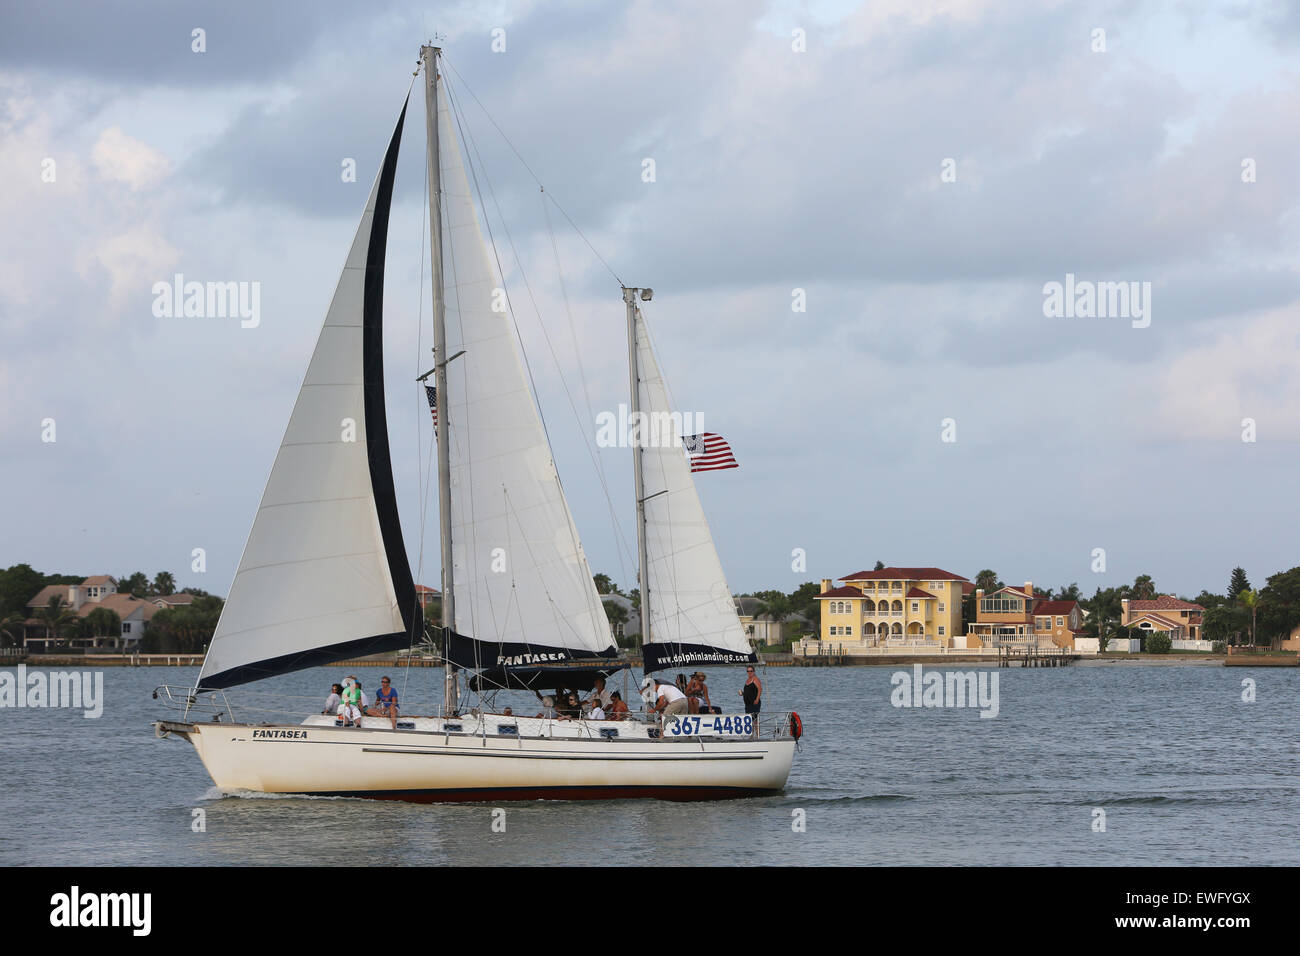 Pass a Grille Beach, USA, Sailing Boat off the coast Stock Photo